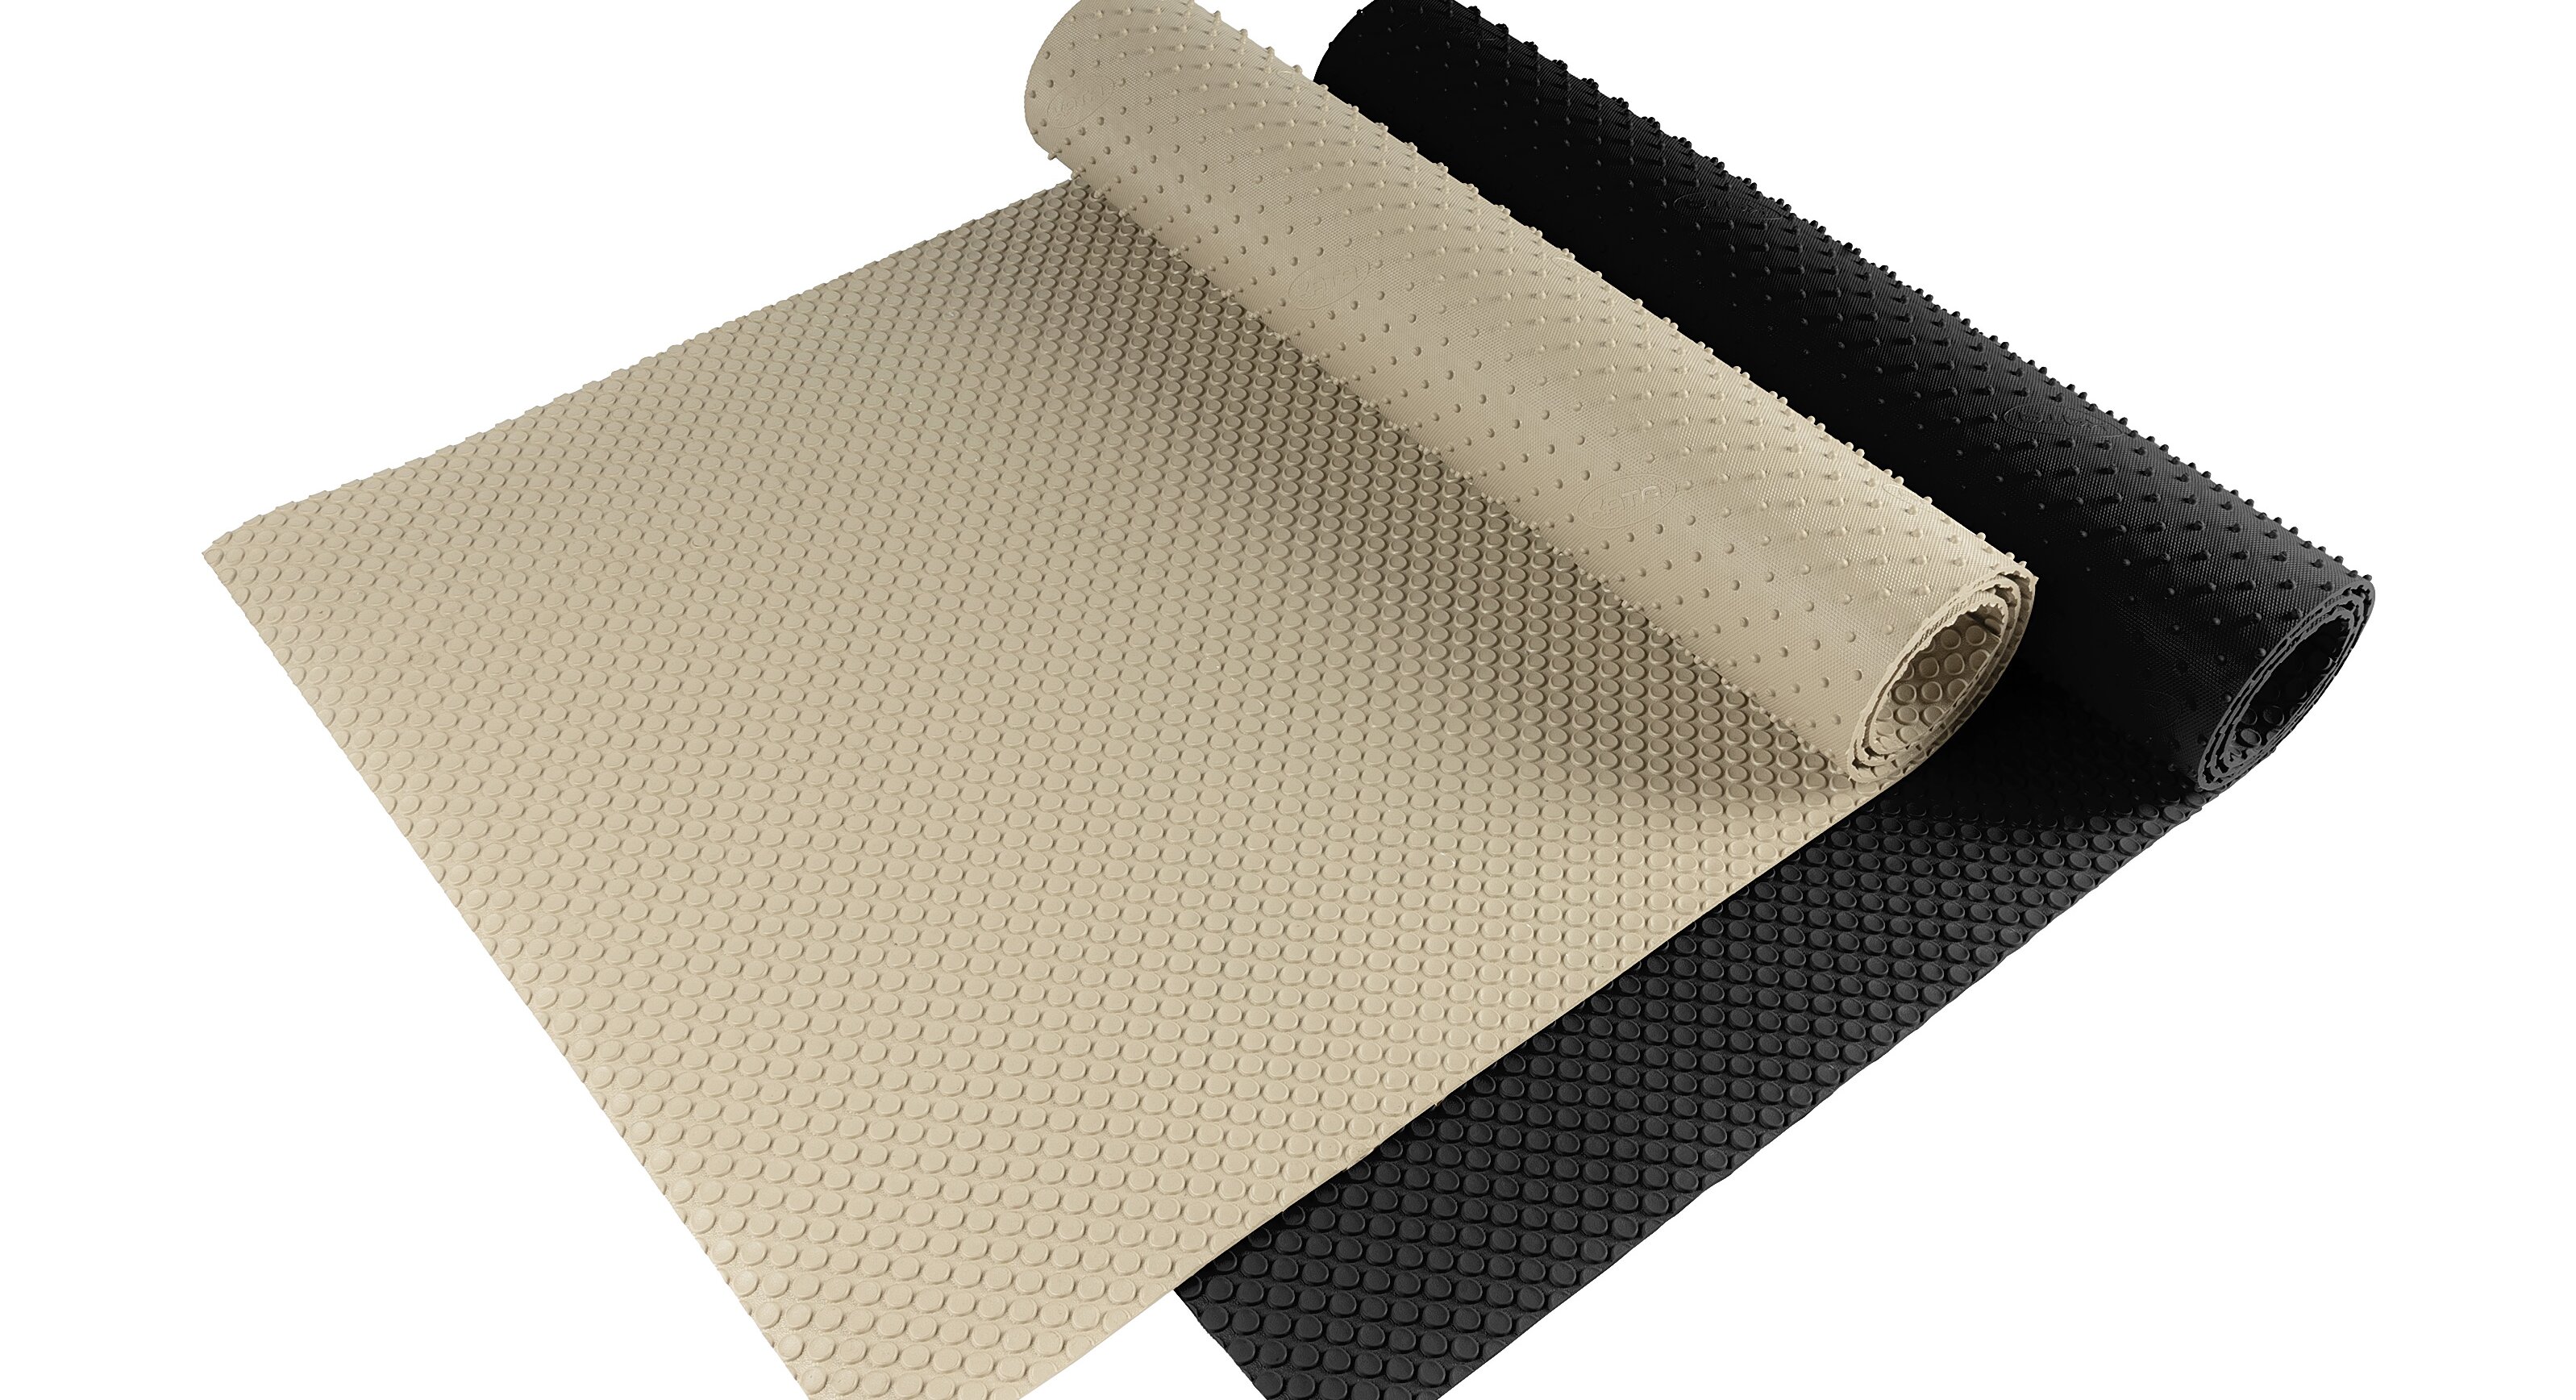 KATA mat rolls made from premium PVC material with superior features